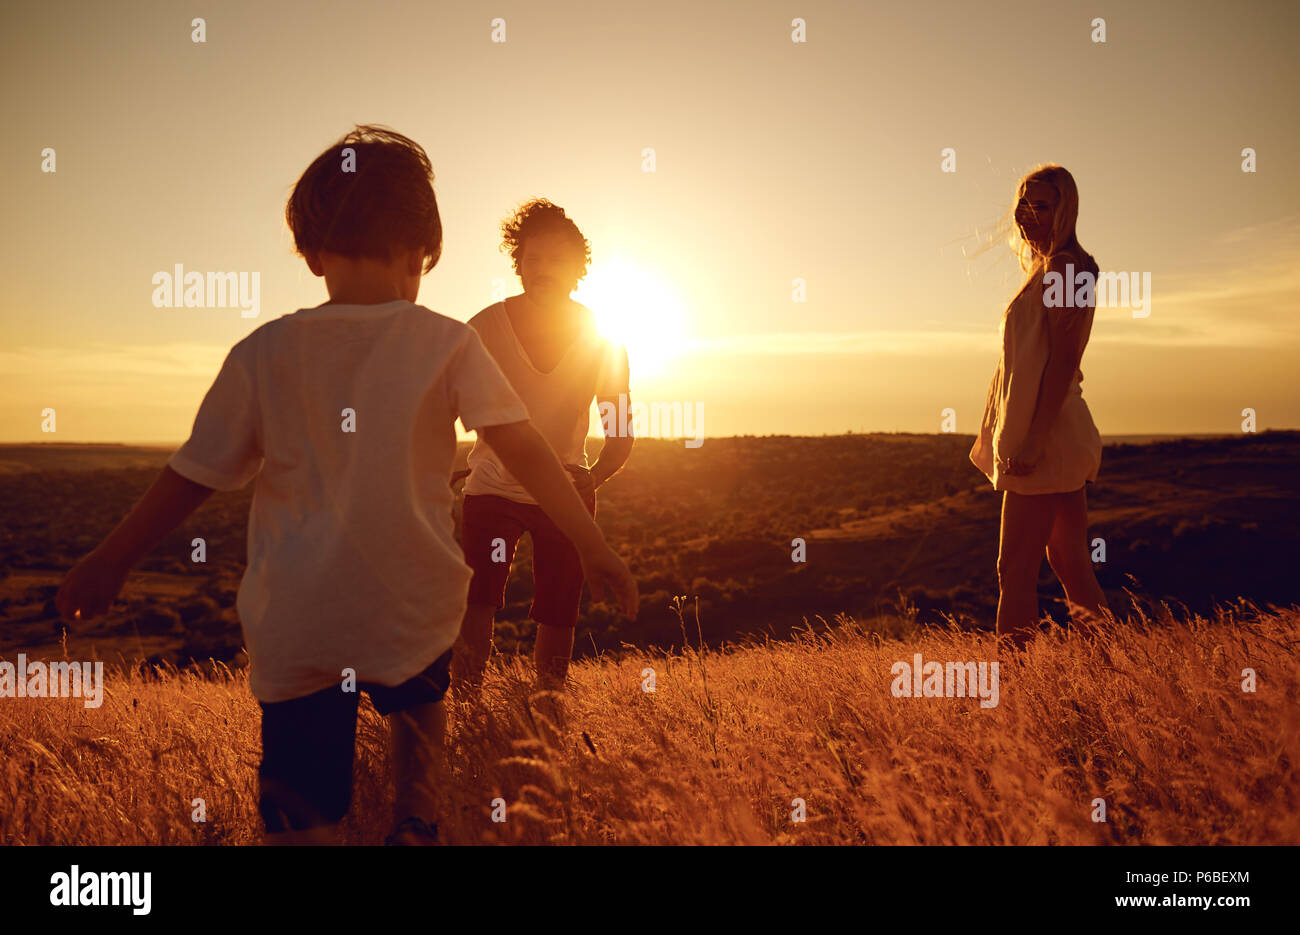 Happy family having fun playing at sunset on nature. Stock Photo